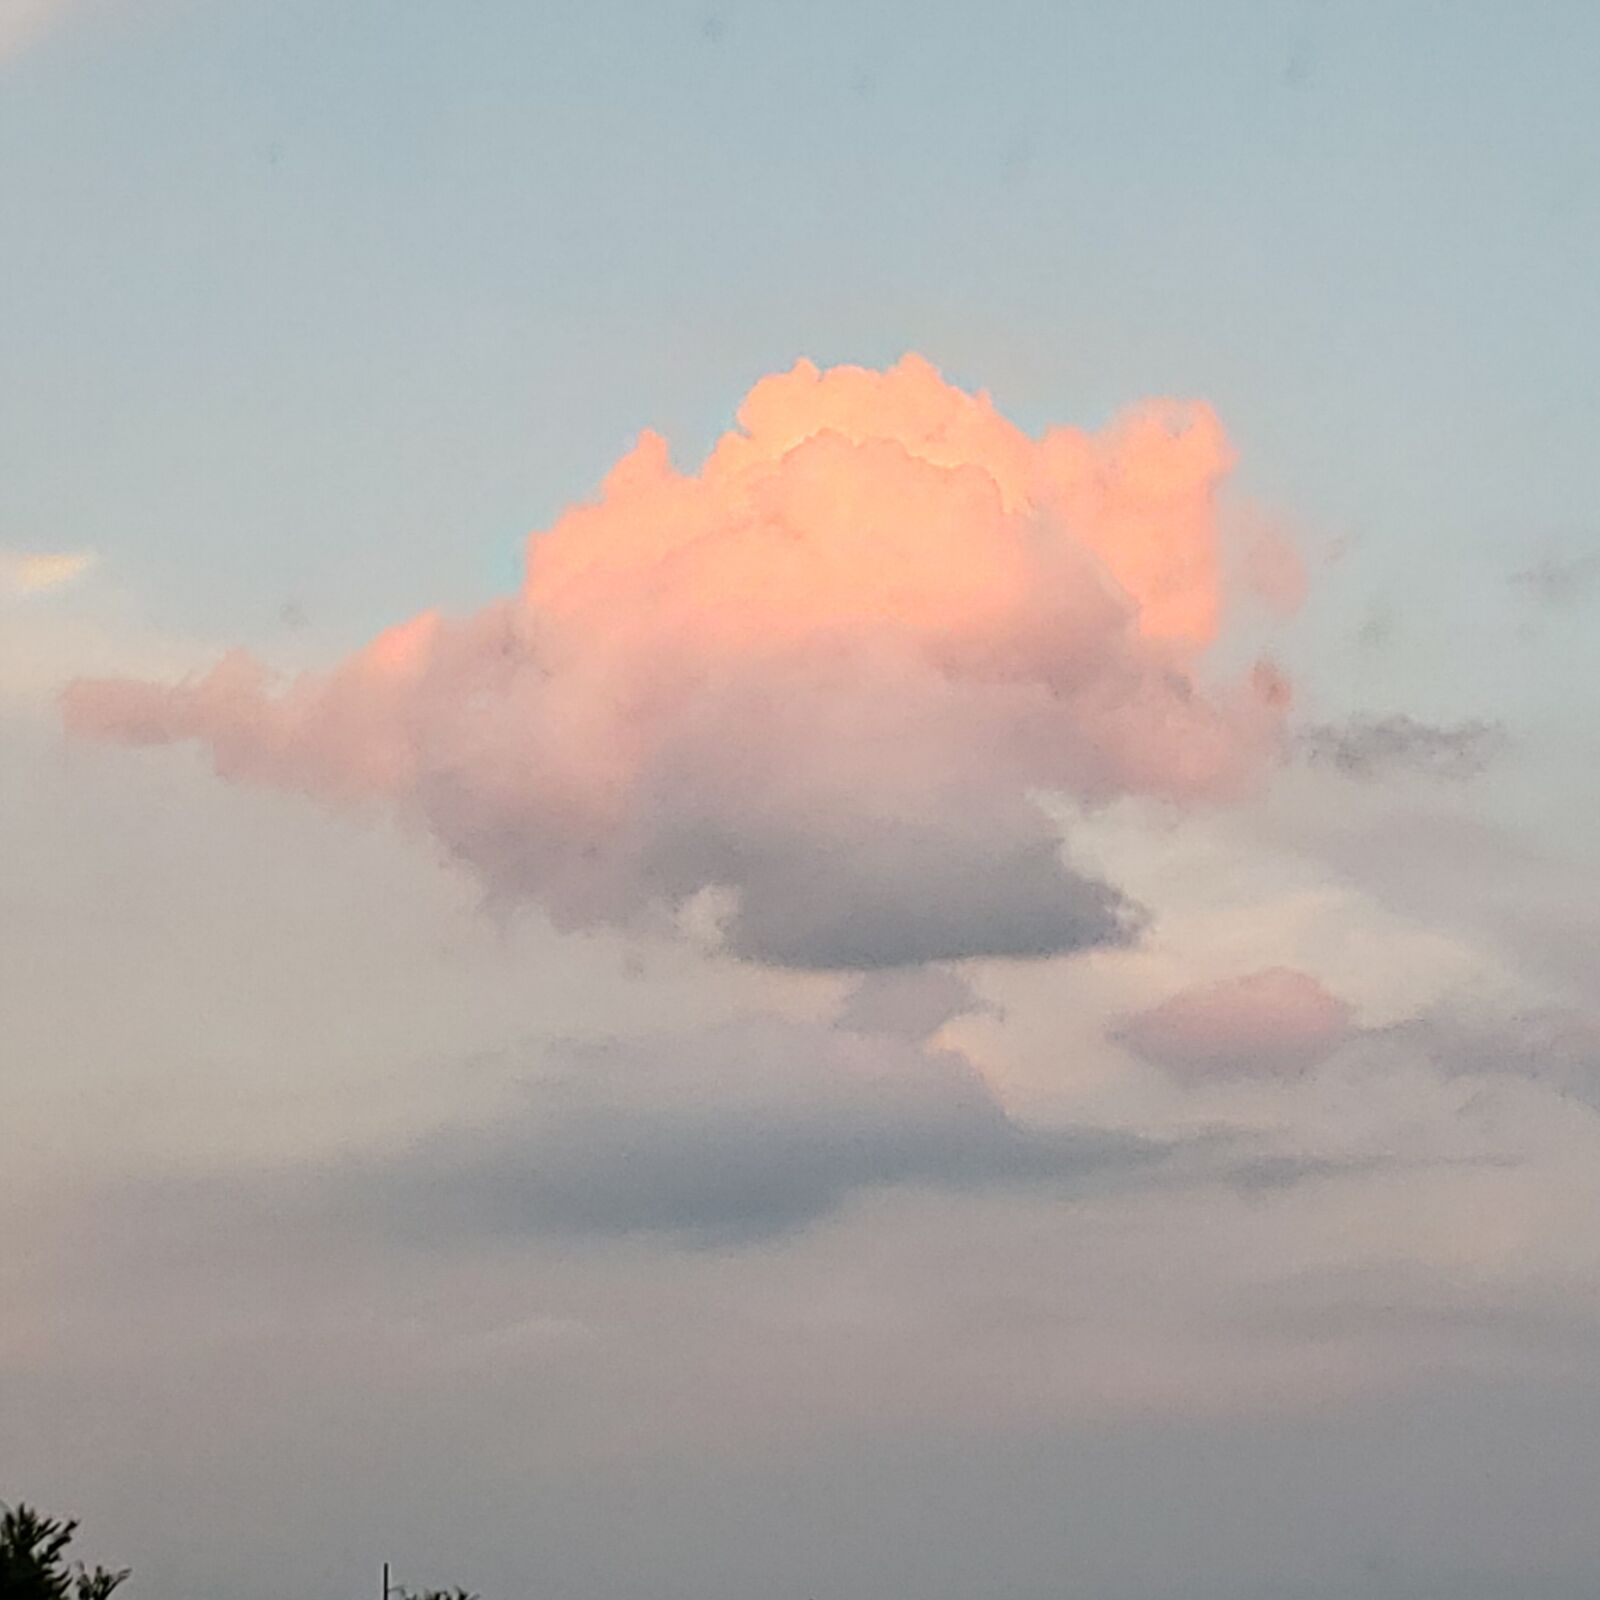 Samsung Galaxy S9 sample photo. Clouds, pink, sunset photography